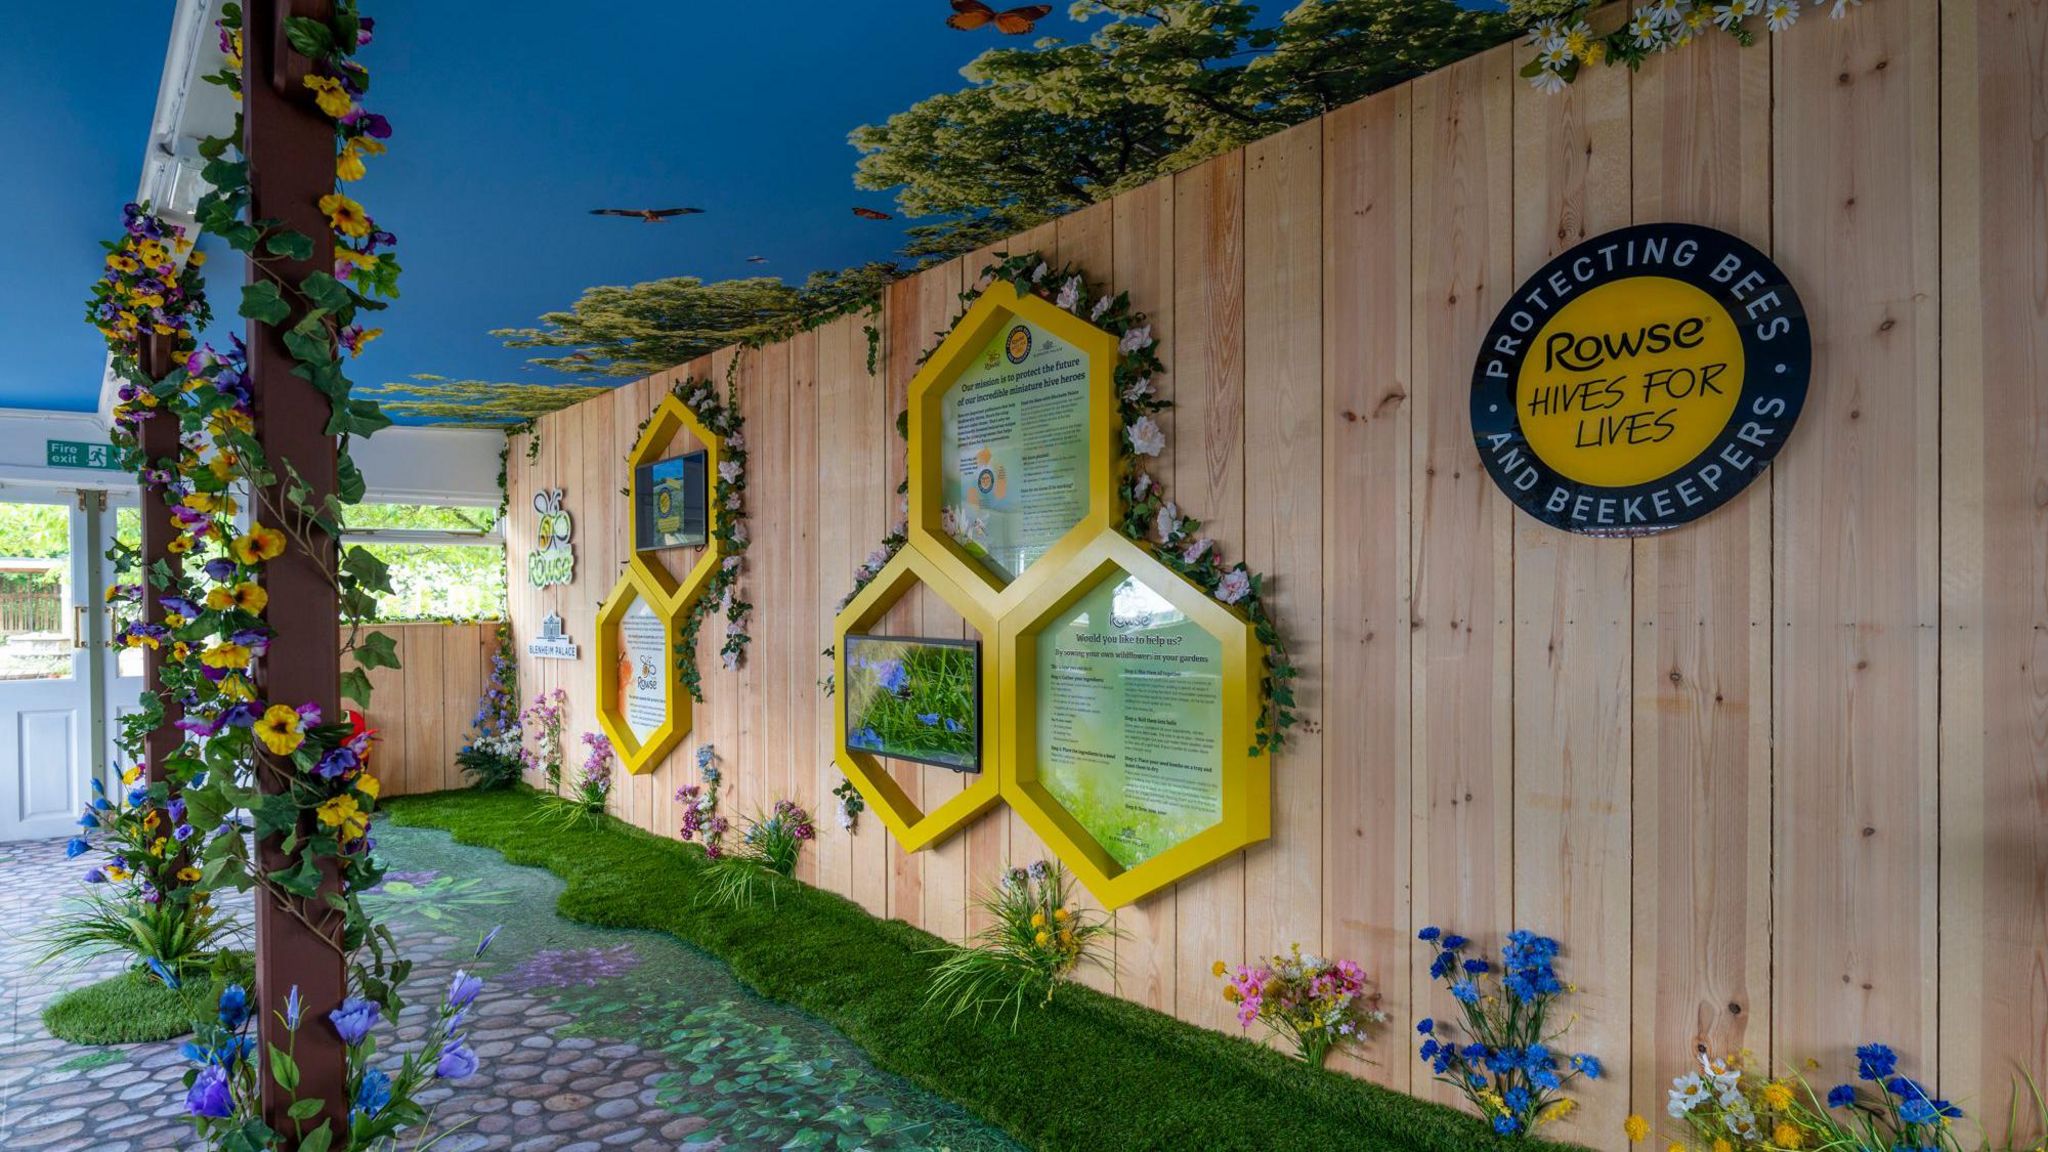 A wall display featuring information about bees, decorated with flowers